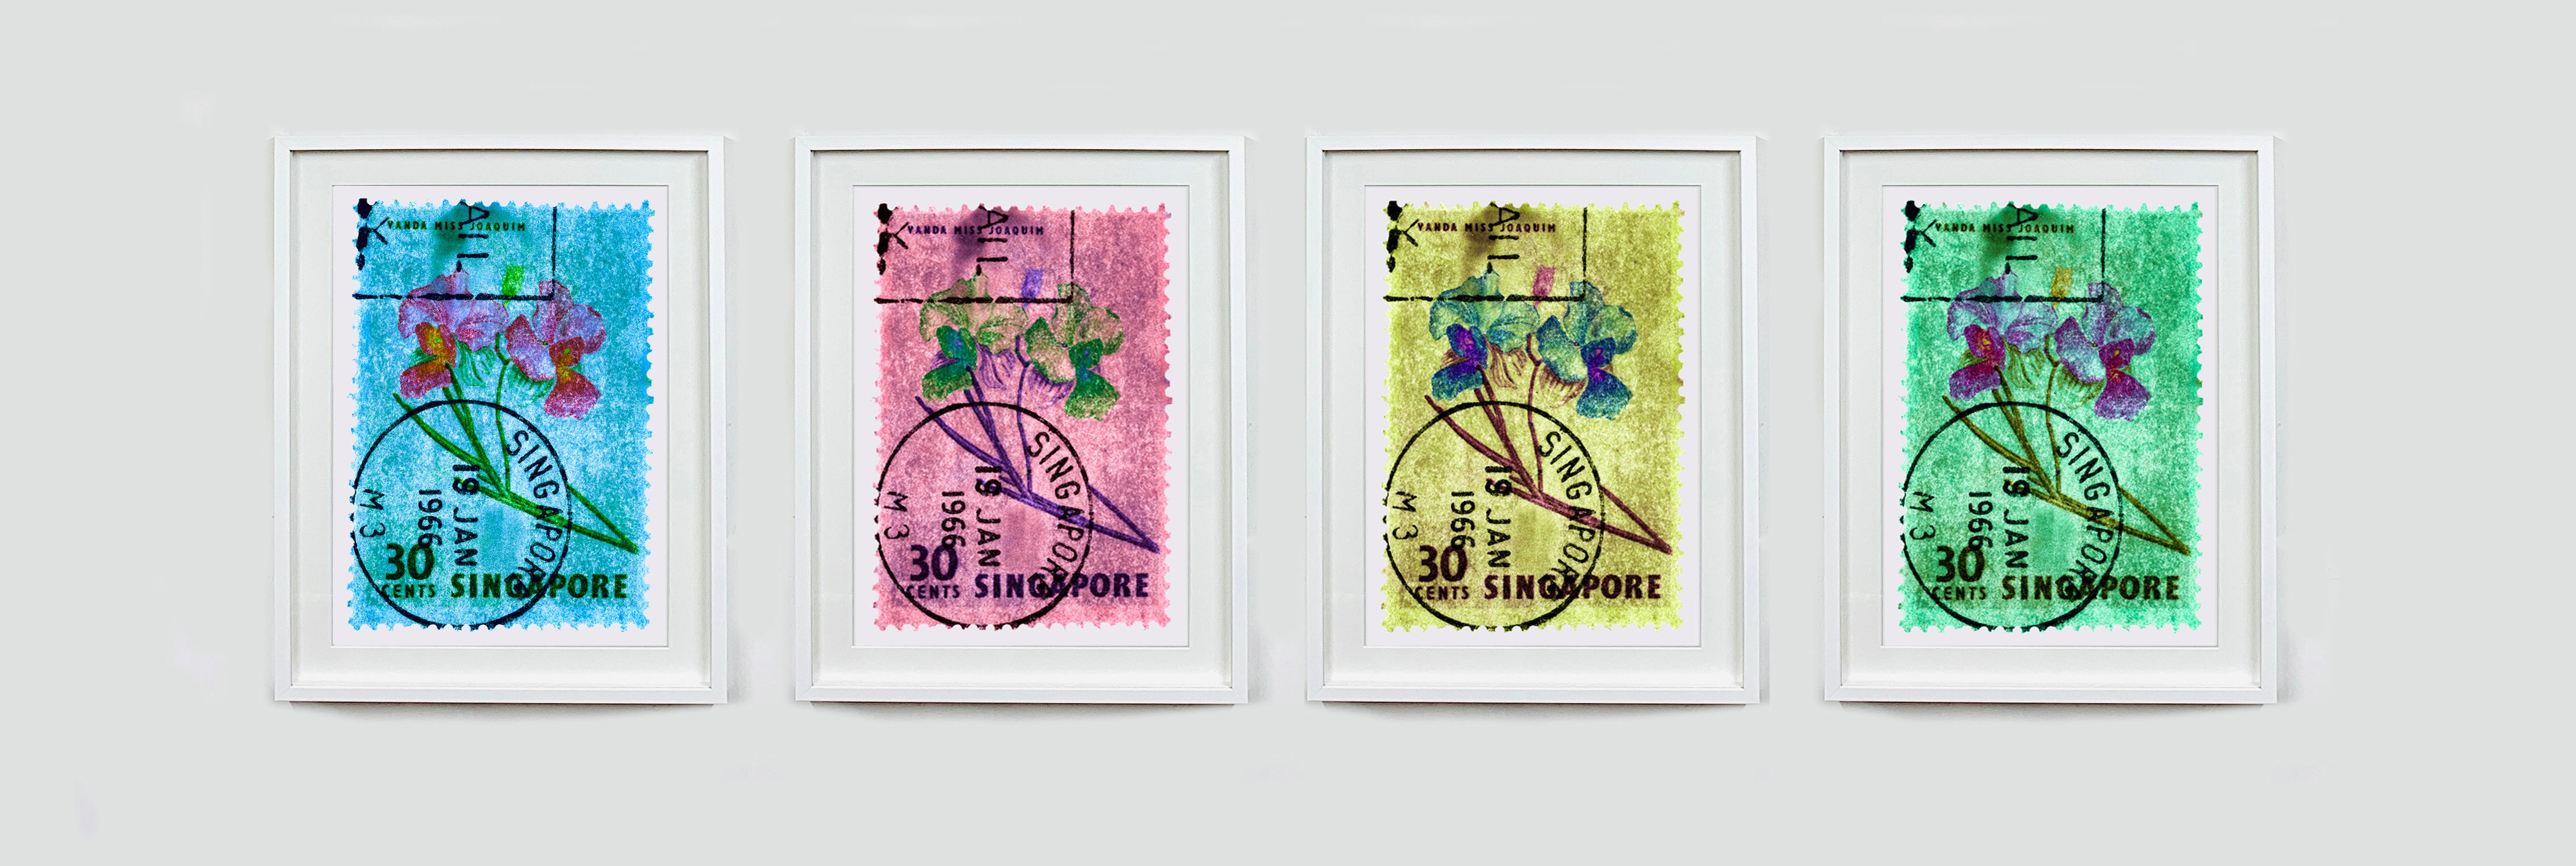 Singapore Stamp Collection, 30c Singapore Orchid Blue - Floral color photo For Sale 1